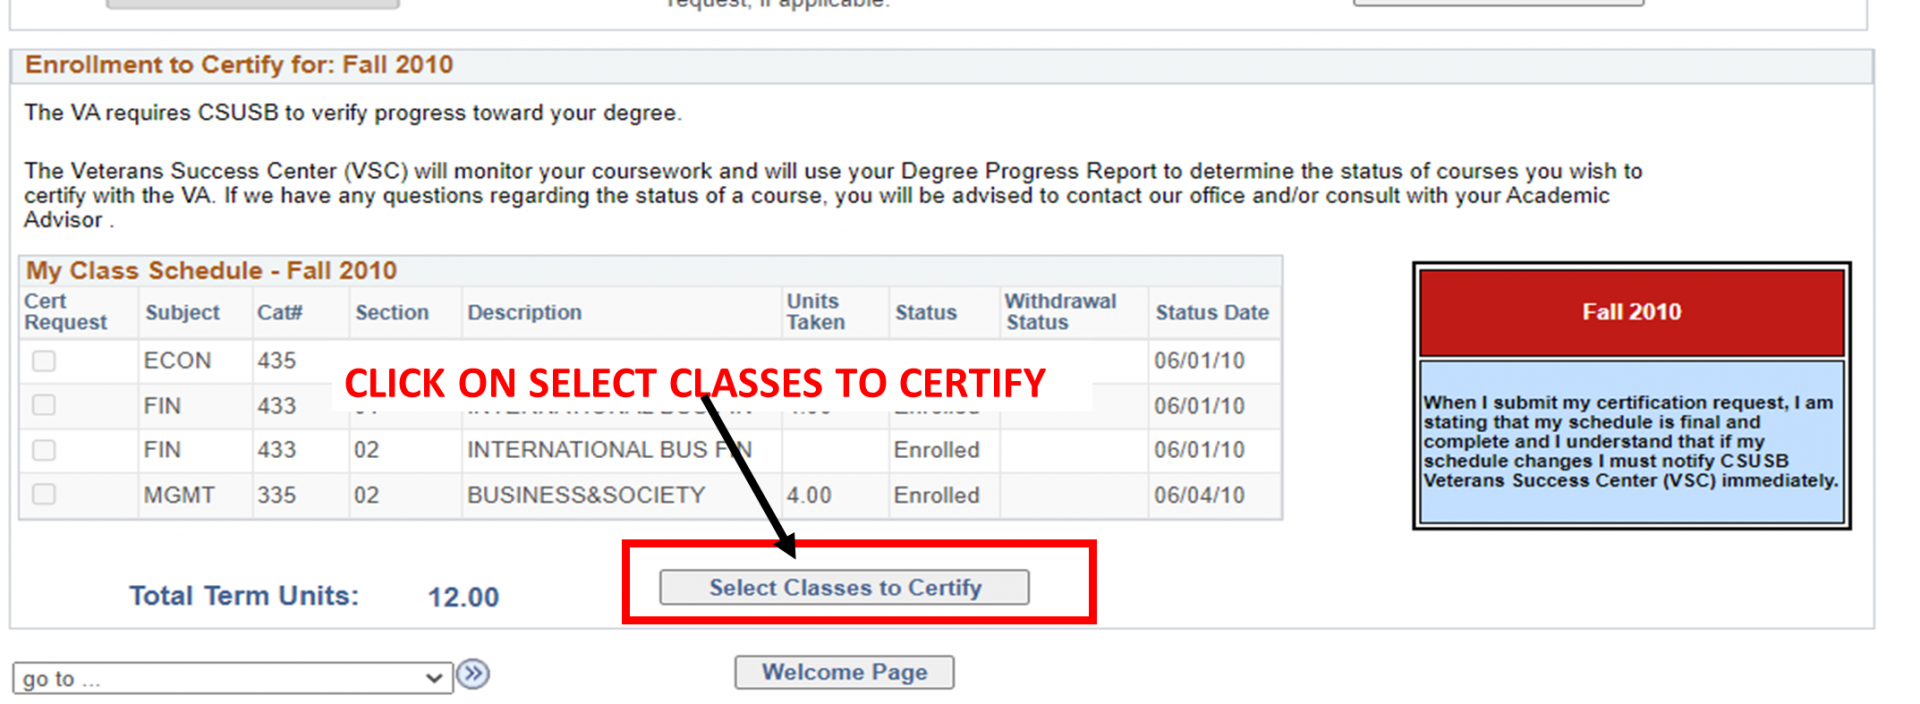 Step 11 - Selection of Classes to Certify